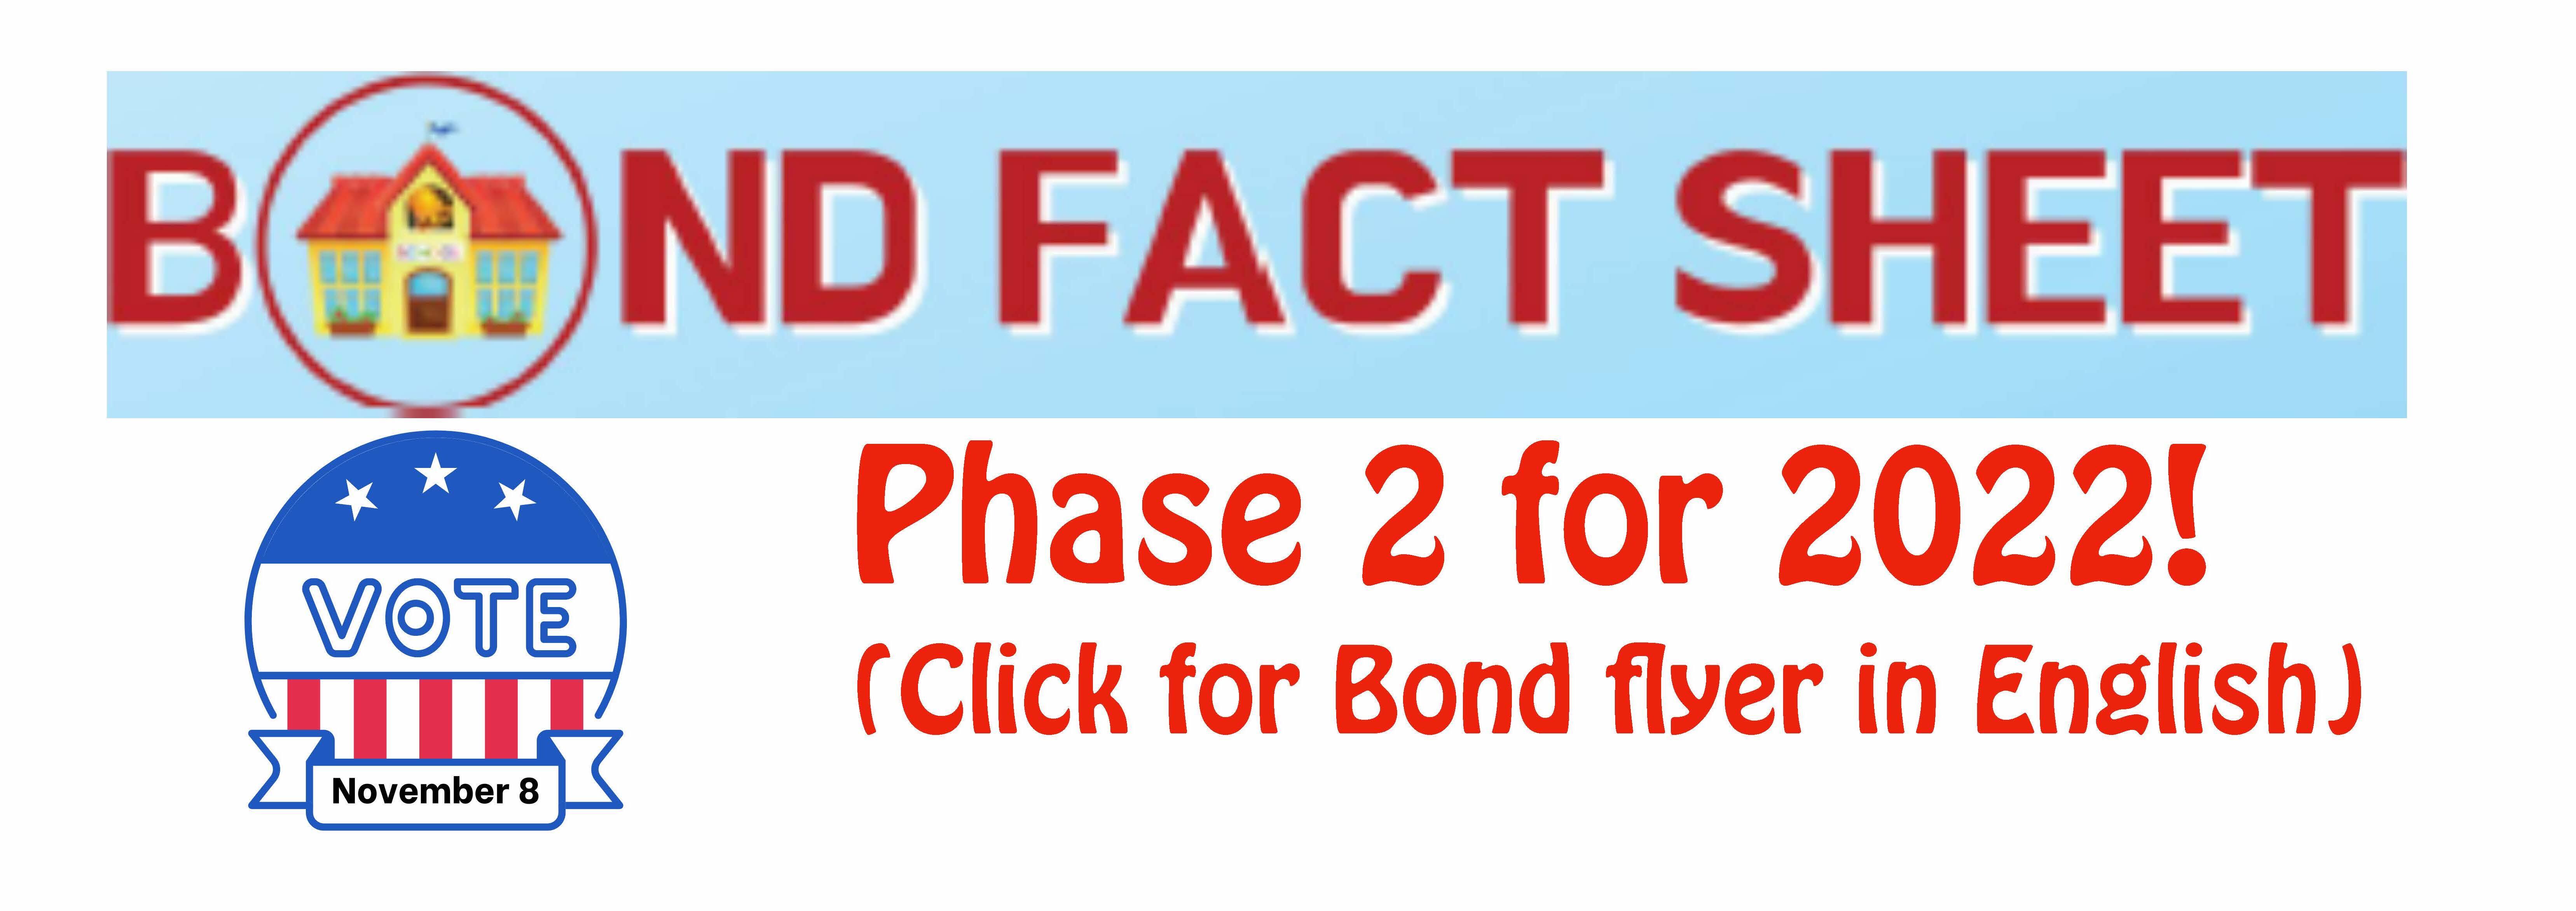 Fact Sheet for Phase 2 of the 2022 School Bond (English)